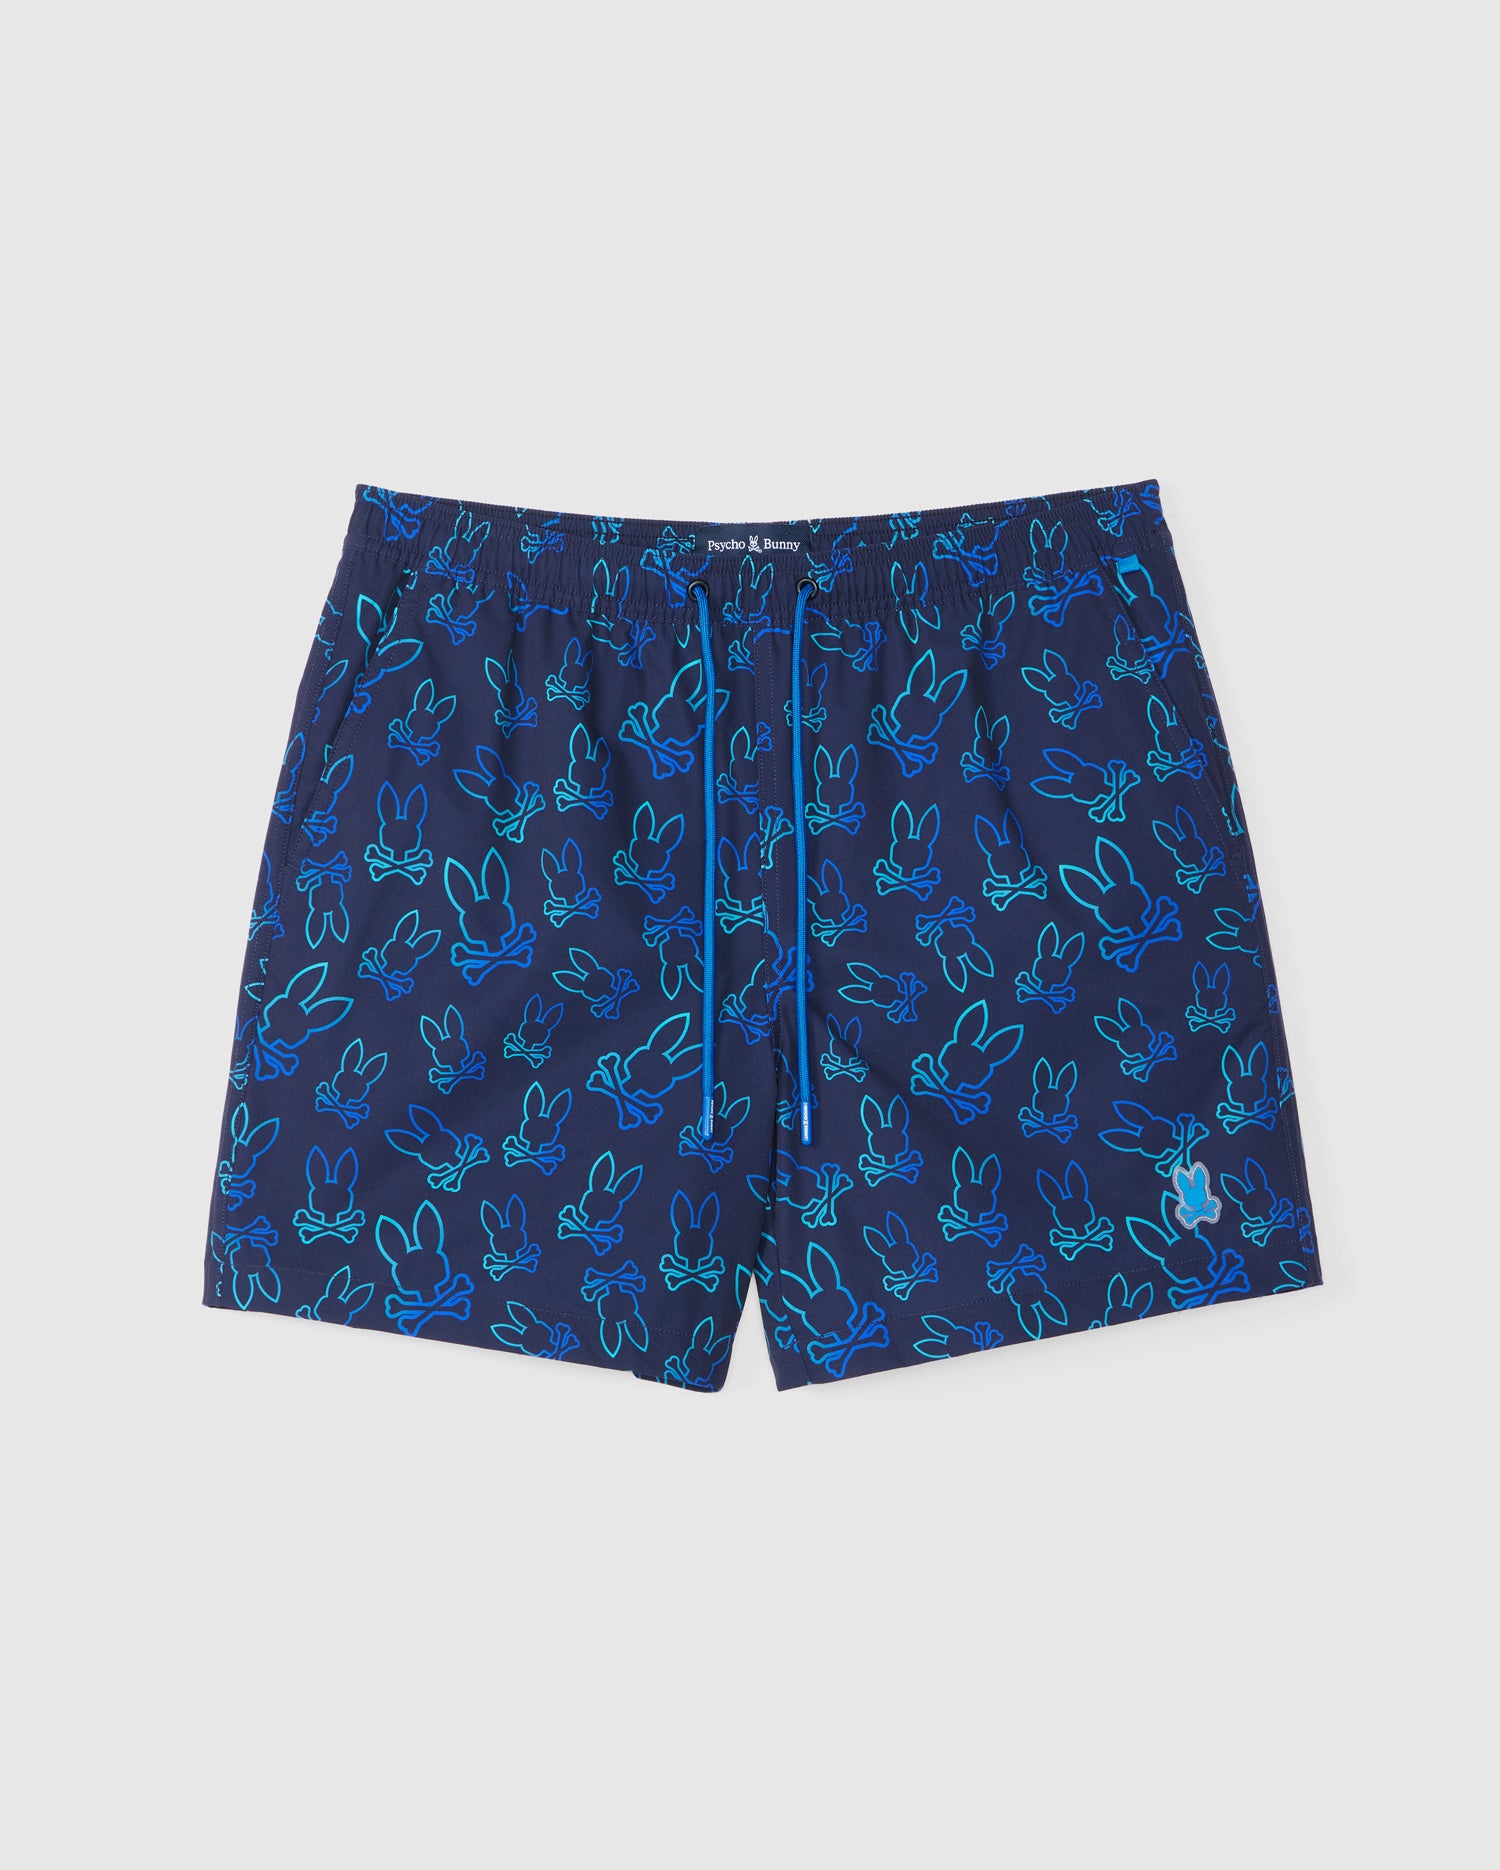 Psycho Bunny MENS SHELDON ALL OVER PRINT SWIM TRUNK - B6W588C200, with a playful, repeating bunny pattern in various shades of blue, featuring lighter blue and cyan outlines. Made from quick-dry fabric, the shorts have an elastic waistband and a drawstring for adjustment.